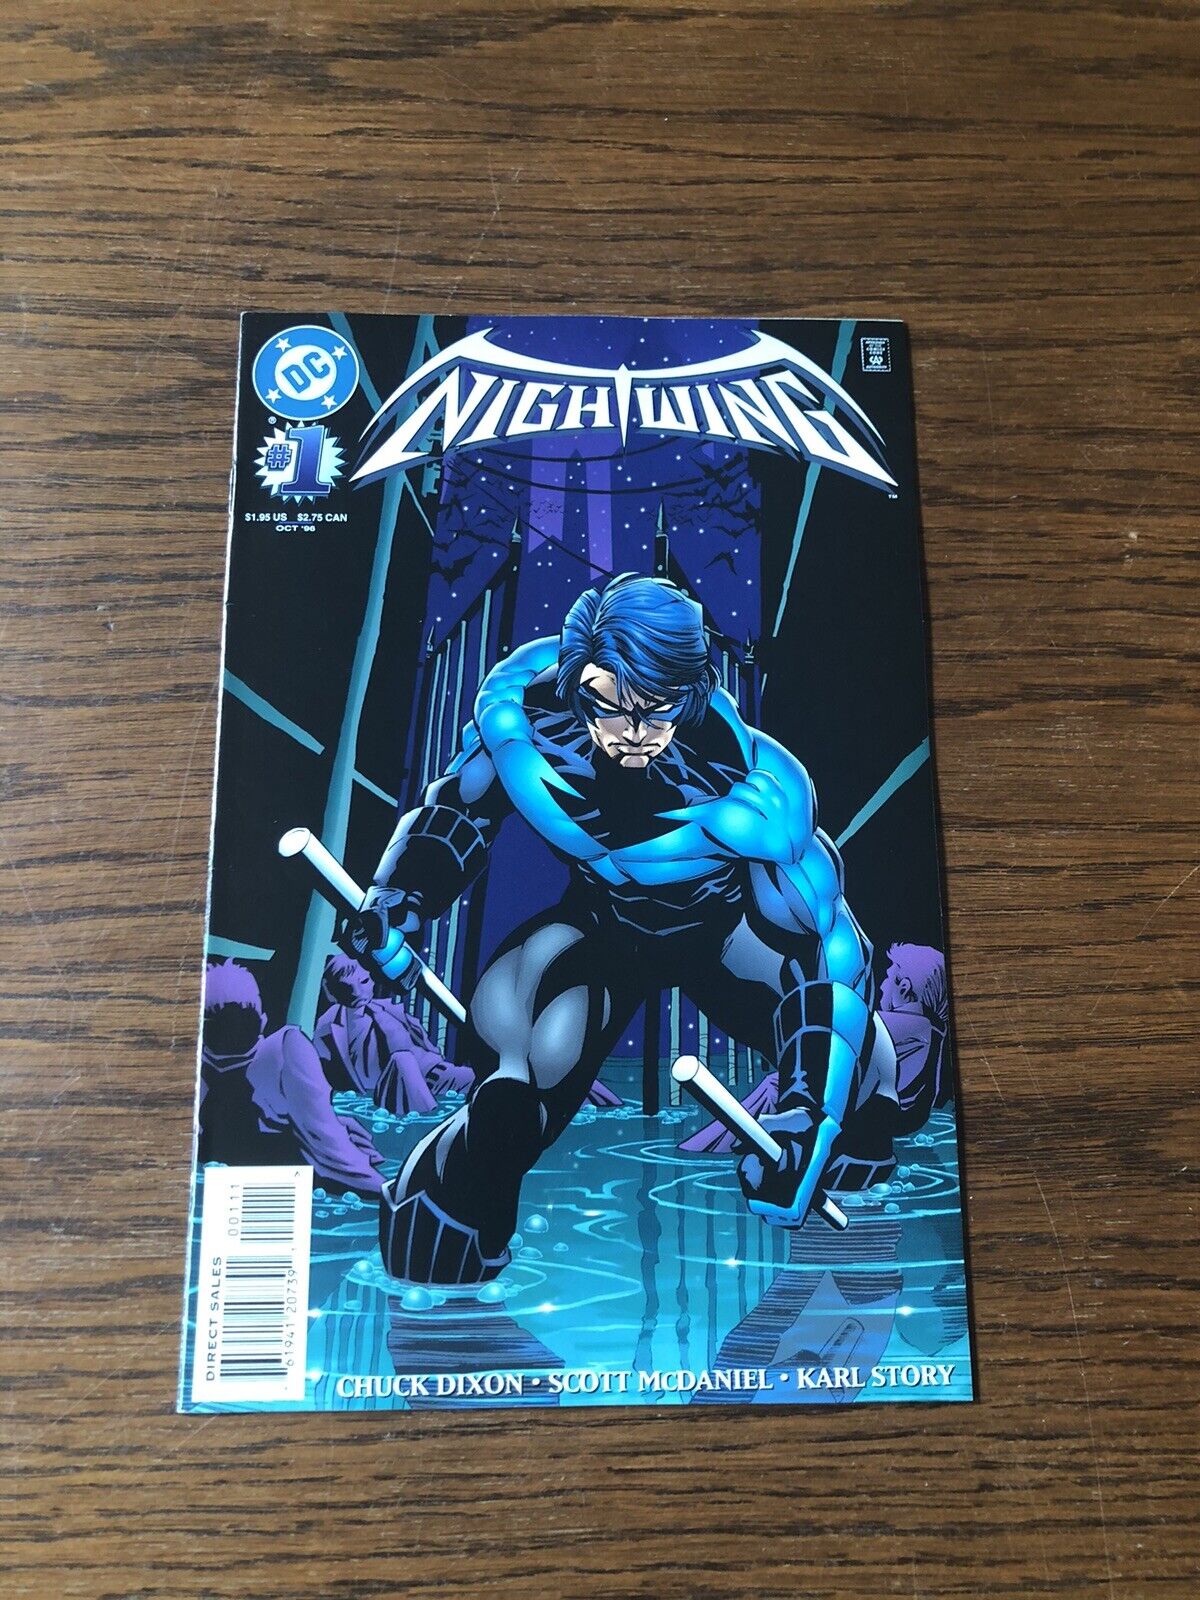 Nightwing Issue#1 DC Comics October 1996